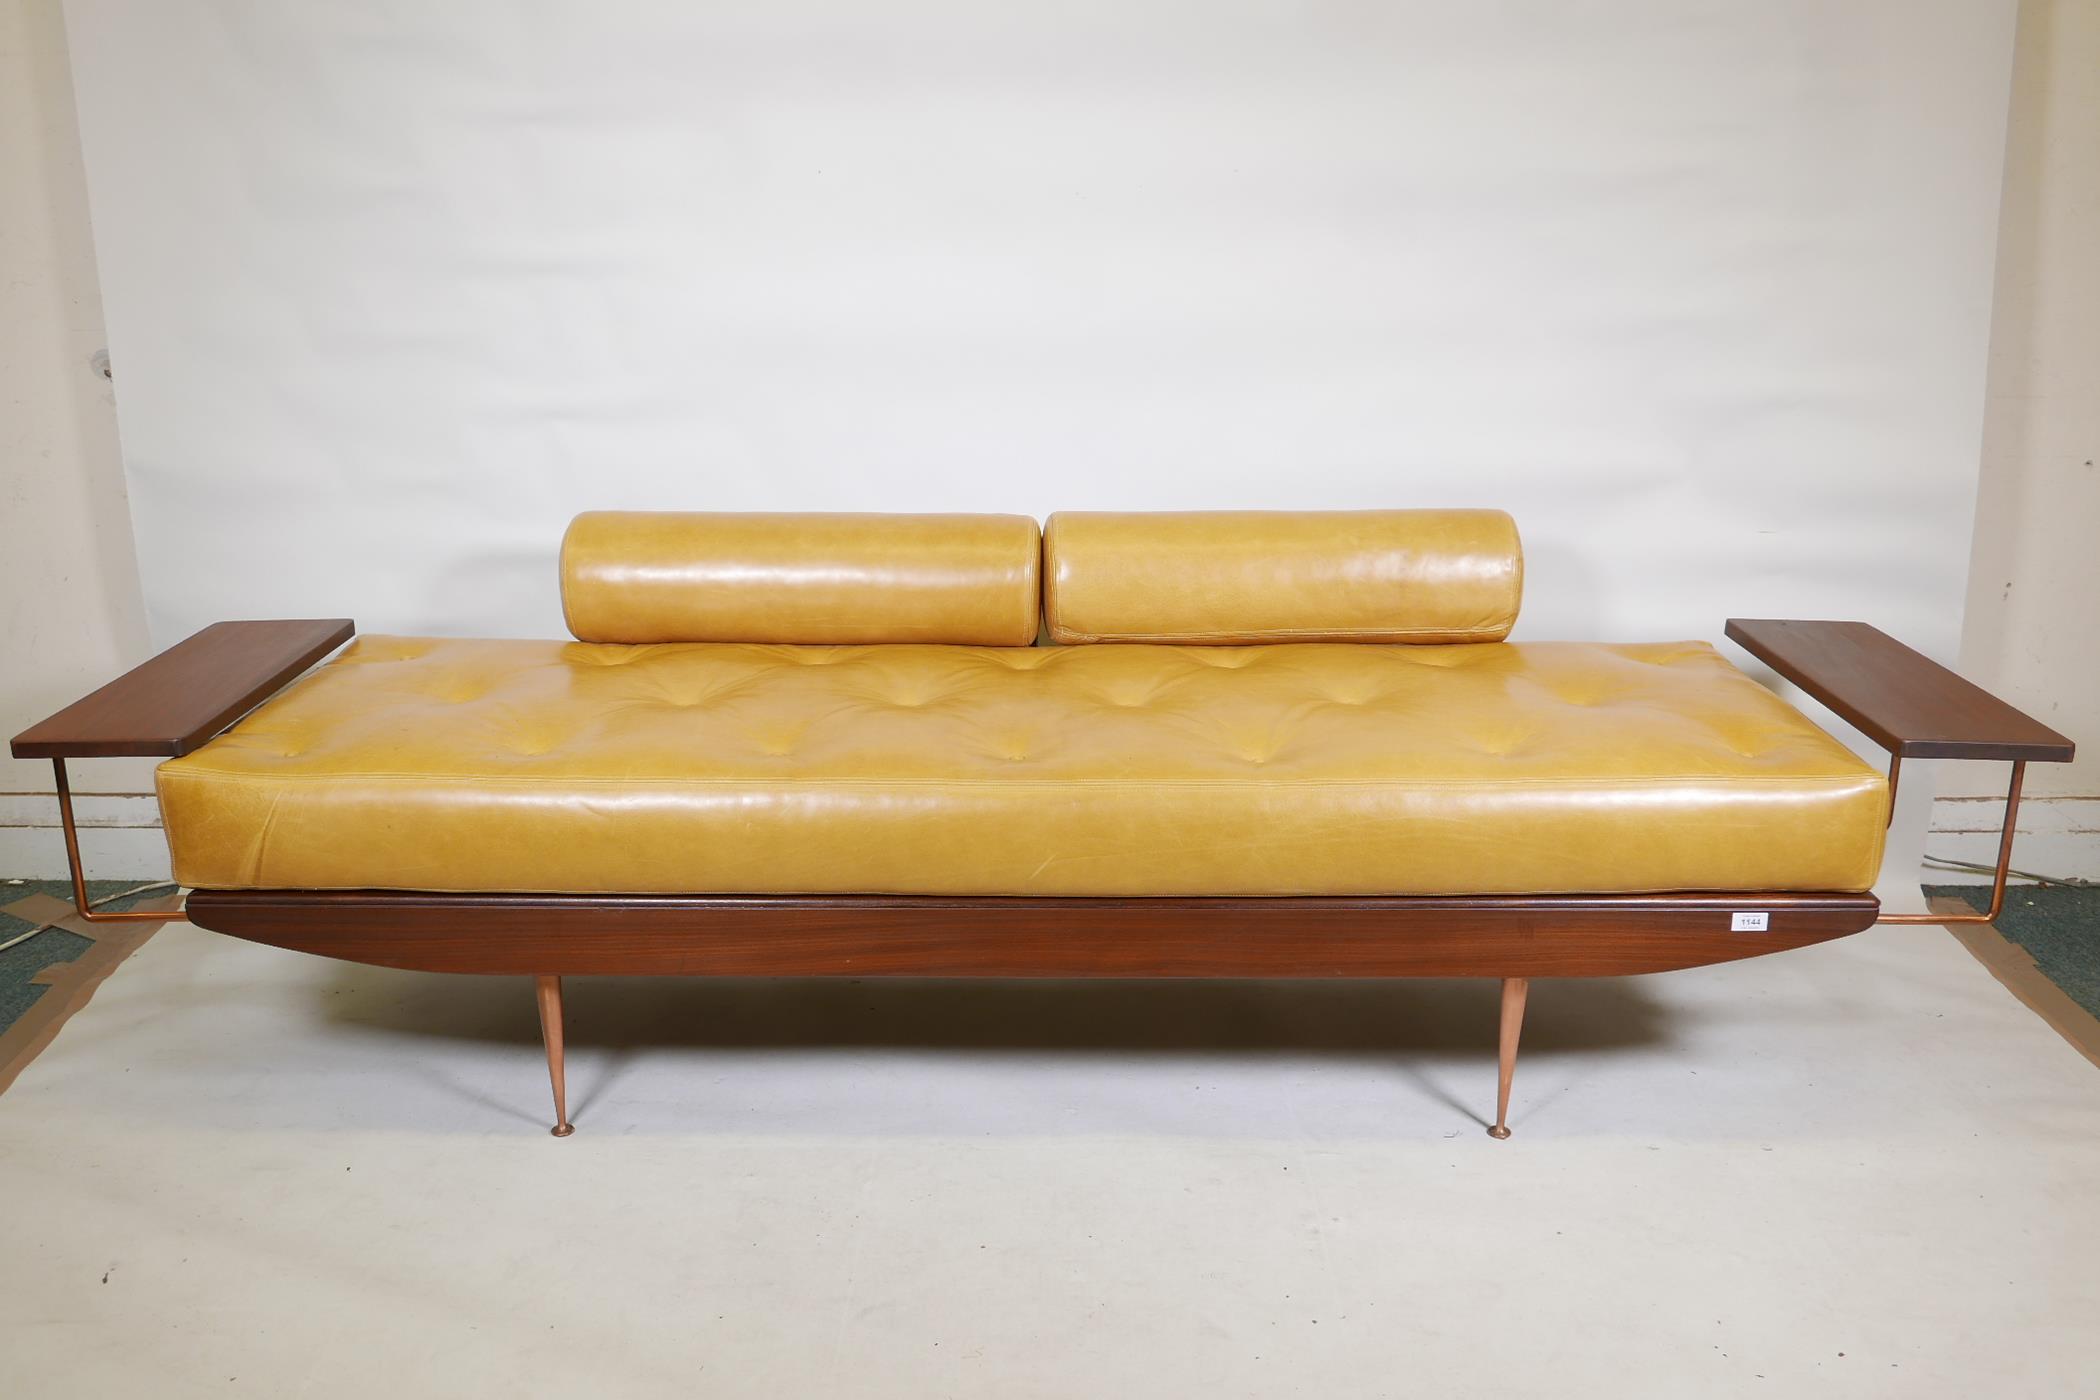 A rare 1950s British Toothill afromosia sofa bed, with buttoned mustard cushions, extending side